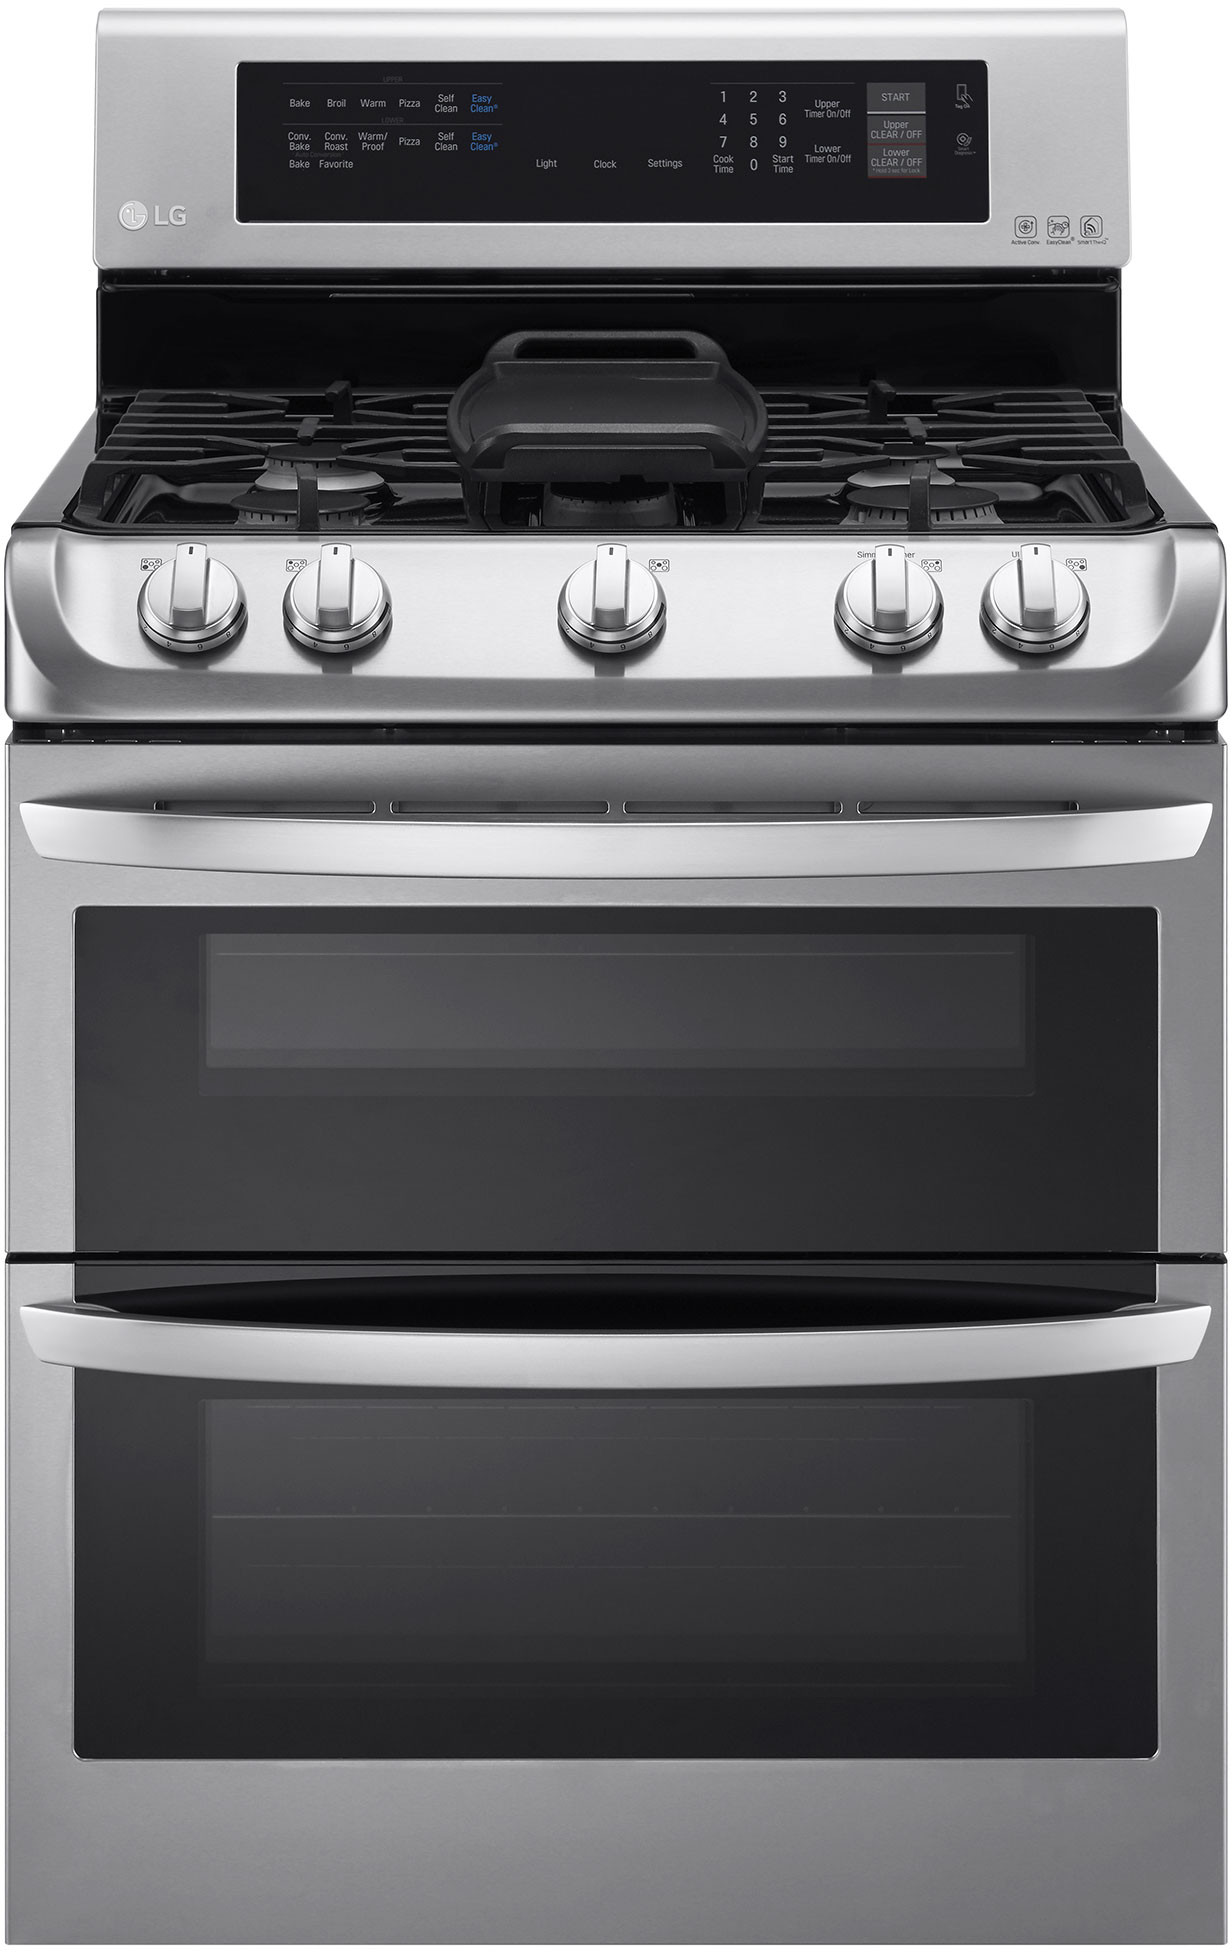 lg-ldg4315st-30-inch-double-oven-gas-range-with-probake-convection